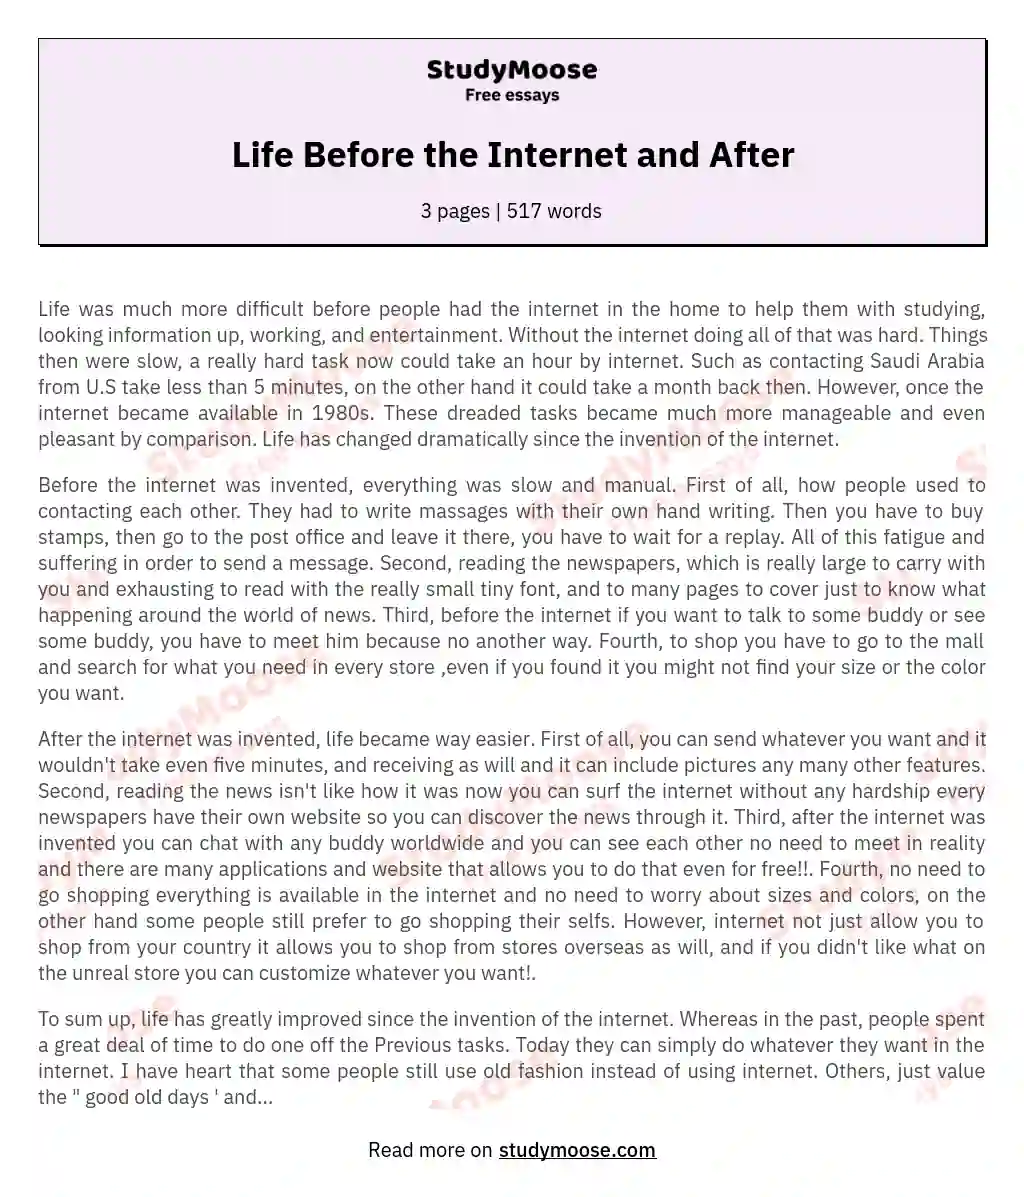 Life Before the Internet and After essay